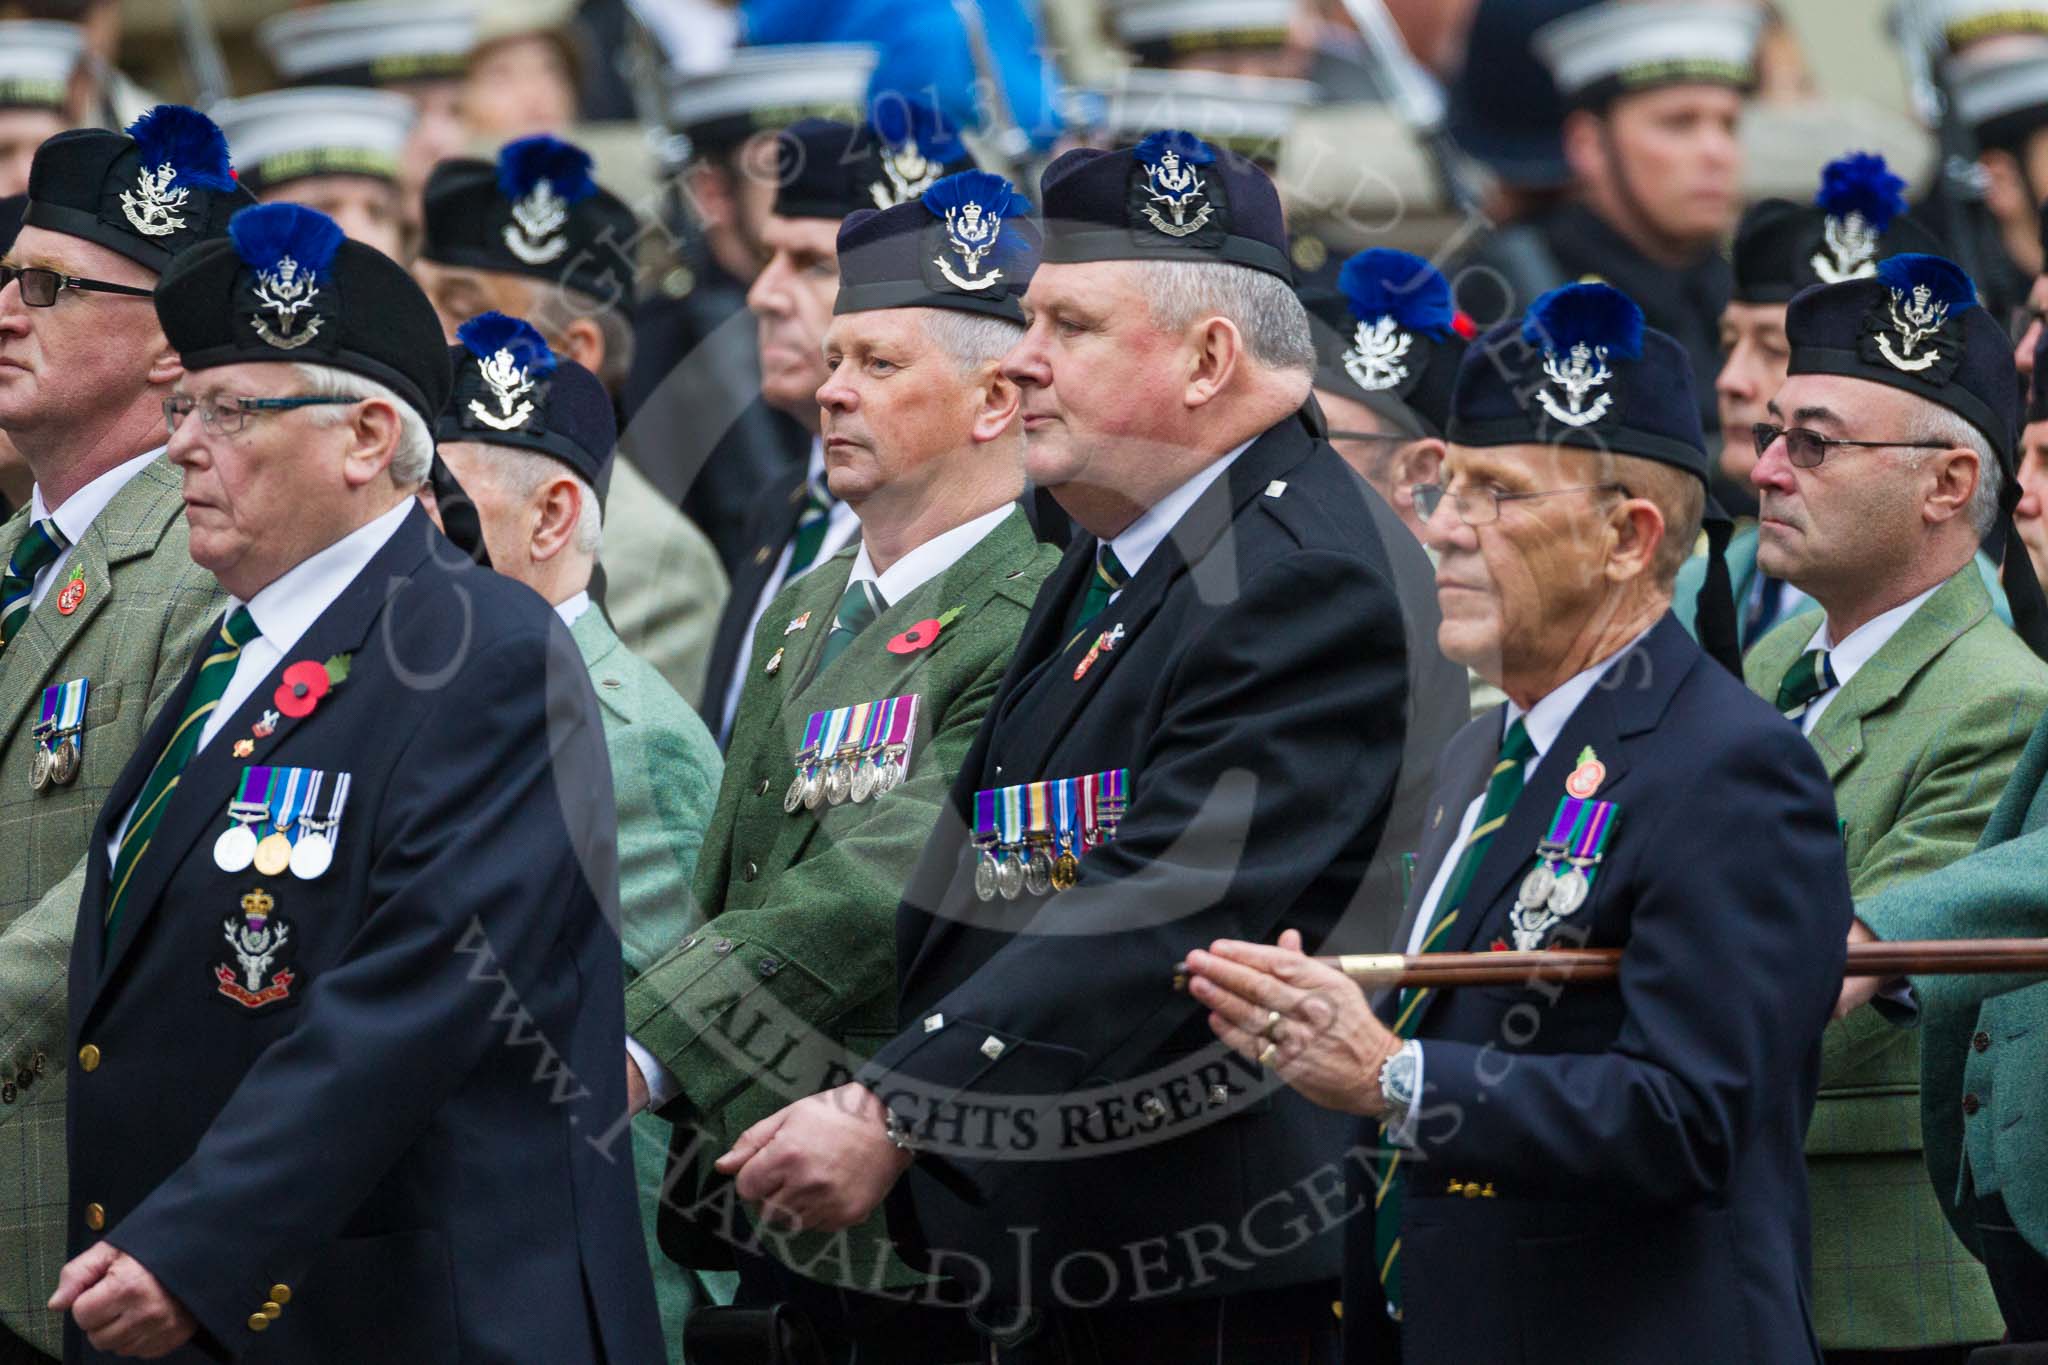 Remembrance Sunday at the Cenotaph 2015: Group A8, Queen's Own Highlanders Regimental Association.
Cenotaph, Whitehall, London SW1,
London,
Greater London,
United Kingdom,
on 08 November 2015 at 12:10, image #1235